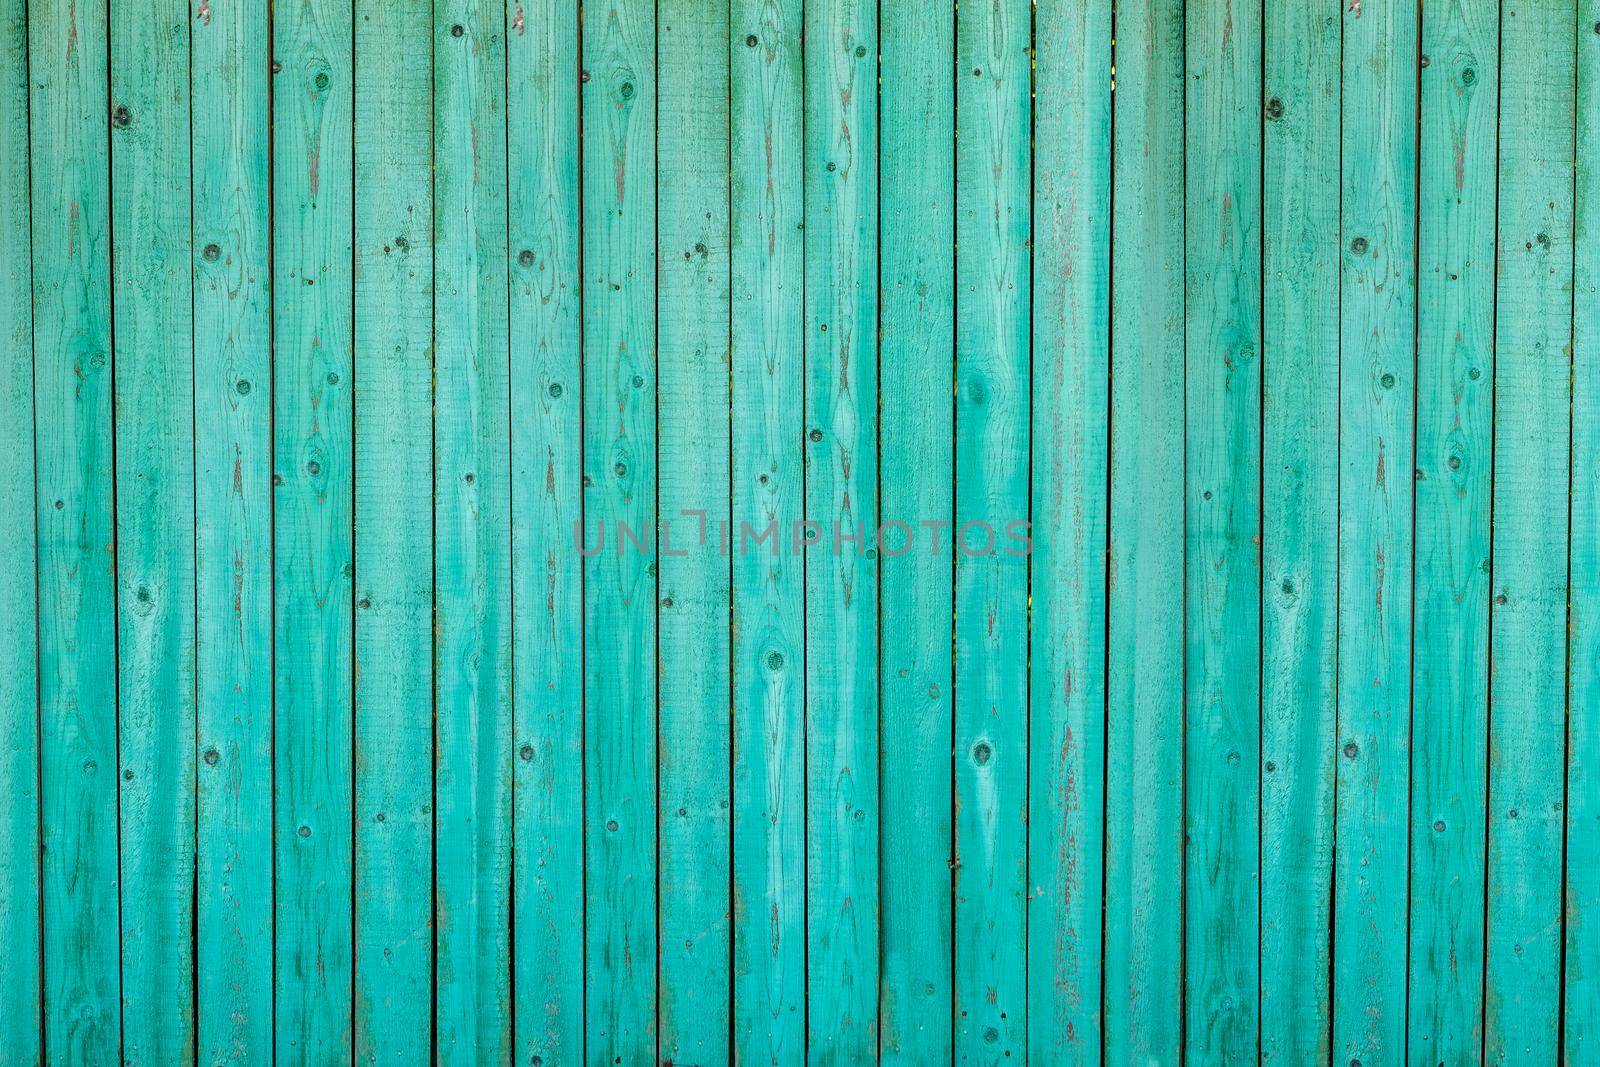 Background textures of old emerald-colored wooden boards used for background Background textures of old wooden boards used for background and drawing images